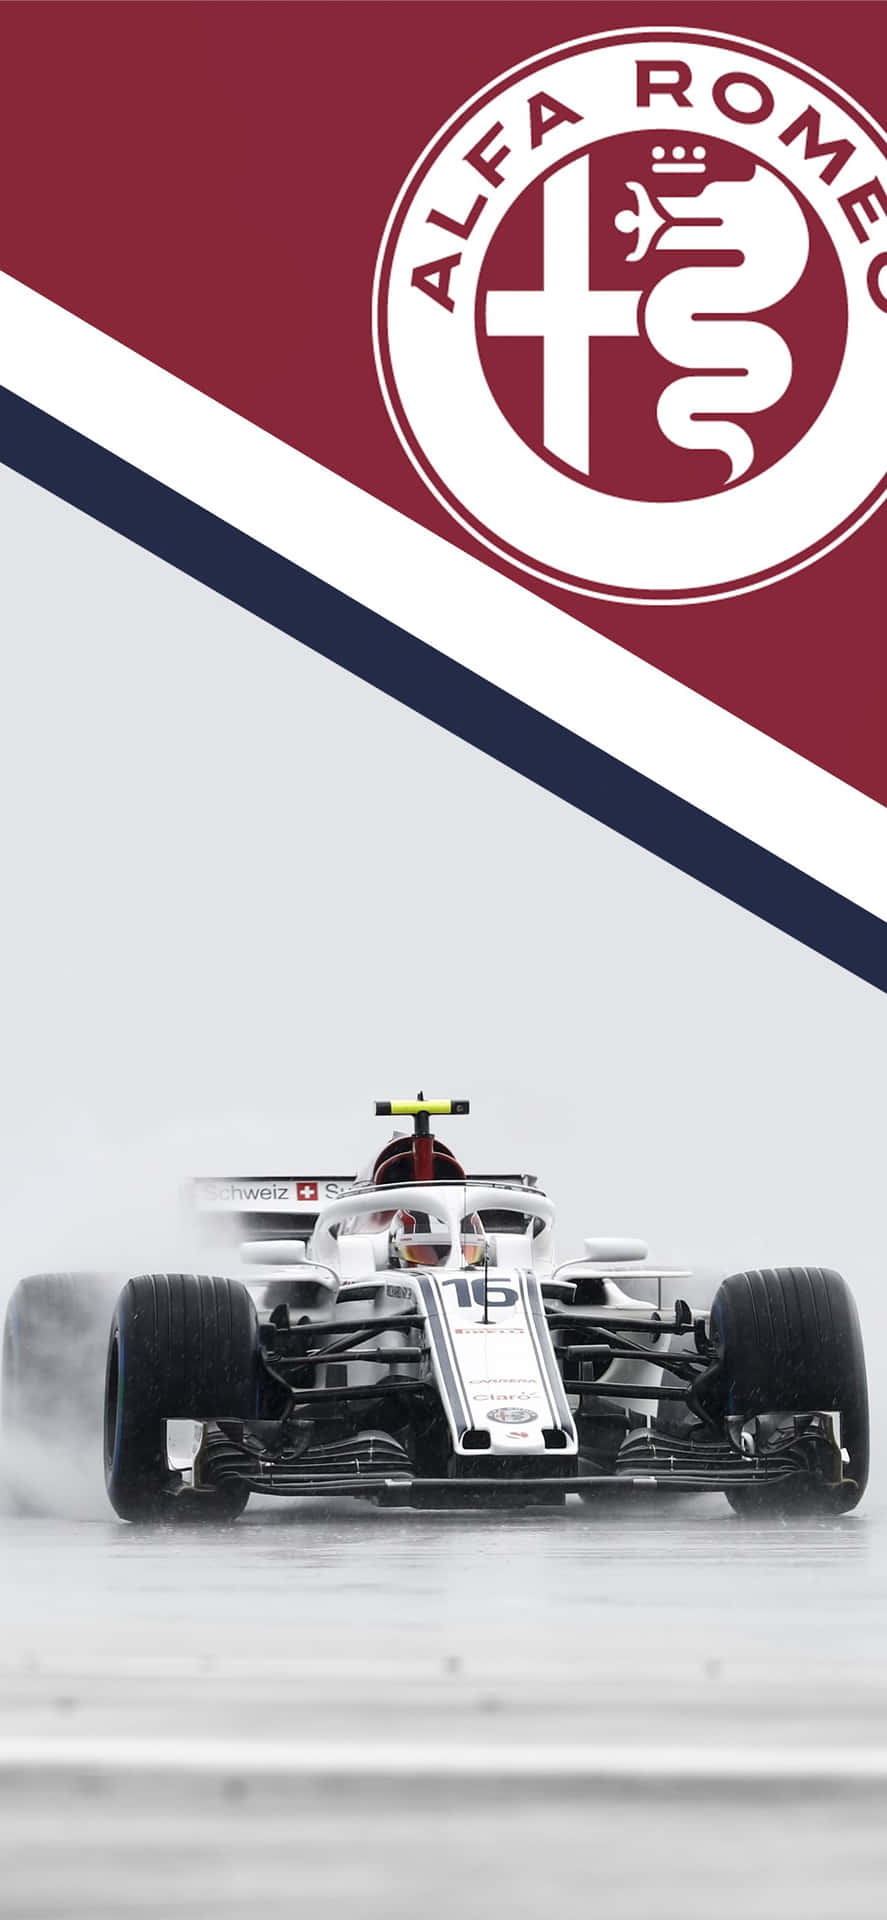 Rev Your Engines! Wallpaper